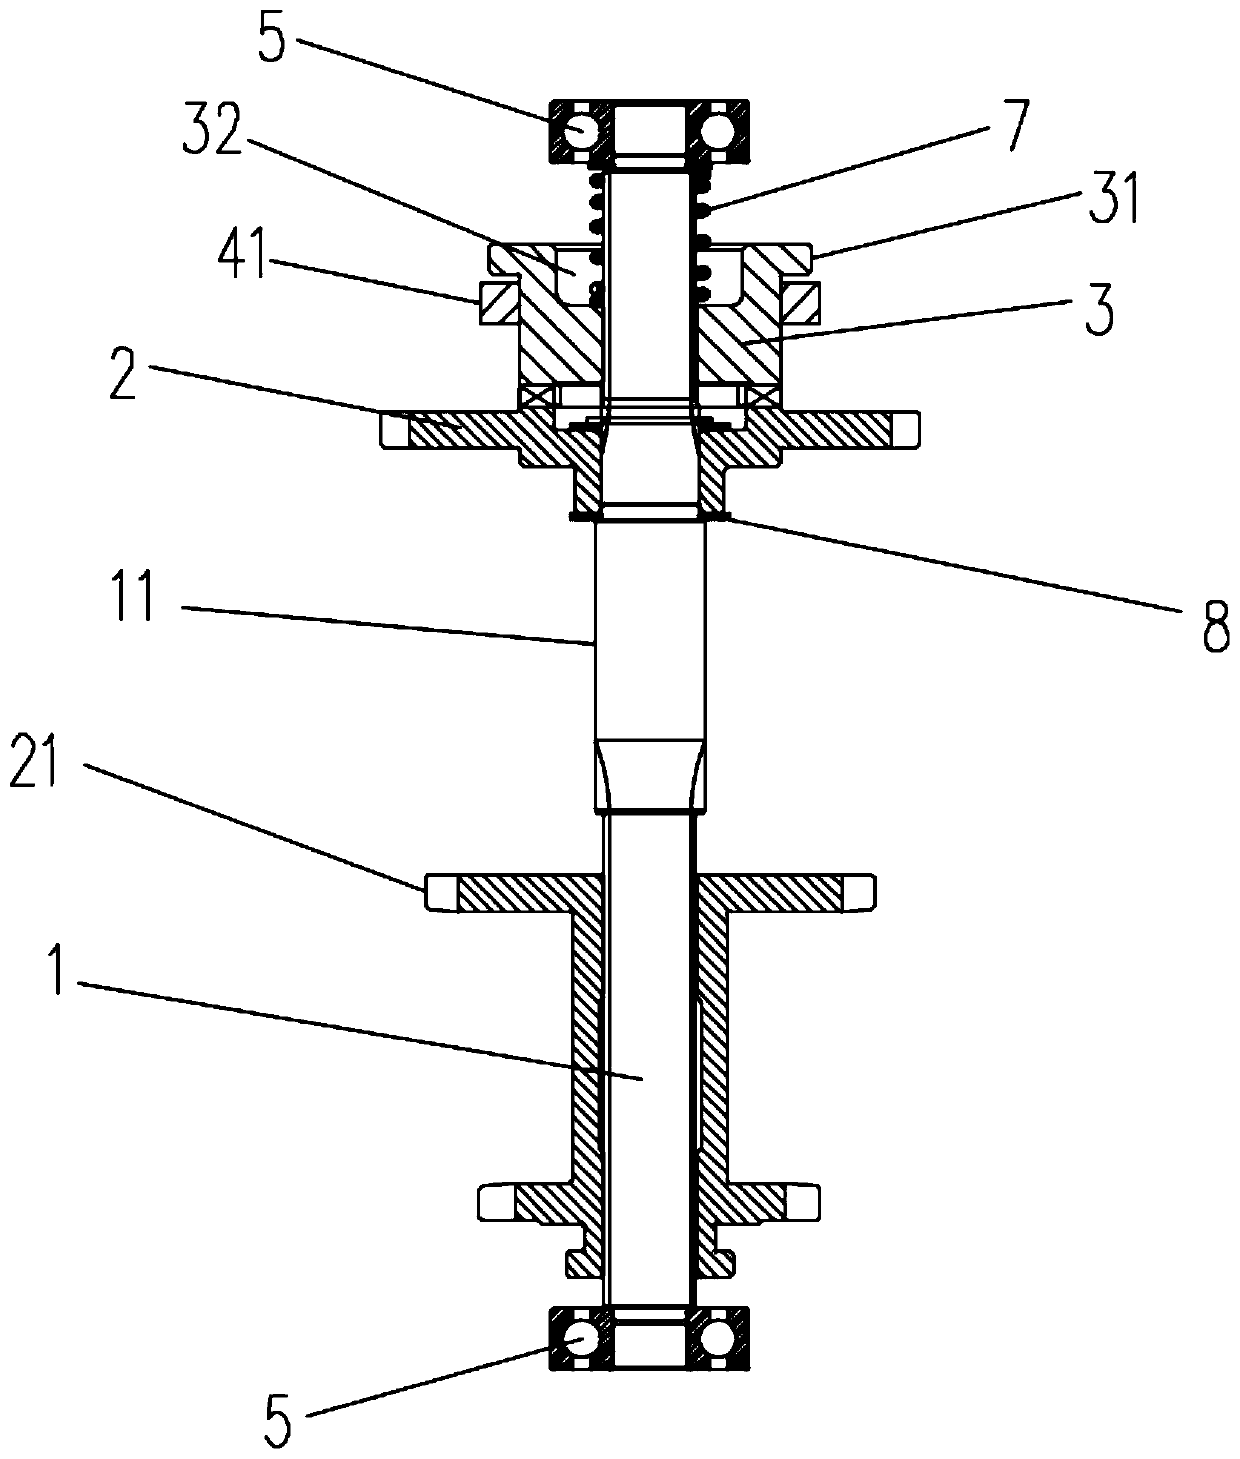 Shifting fork type mechanism for stopping transplanting in backward movement and rice transplanter